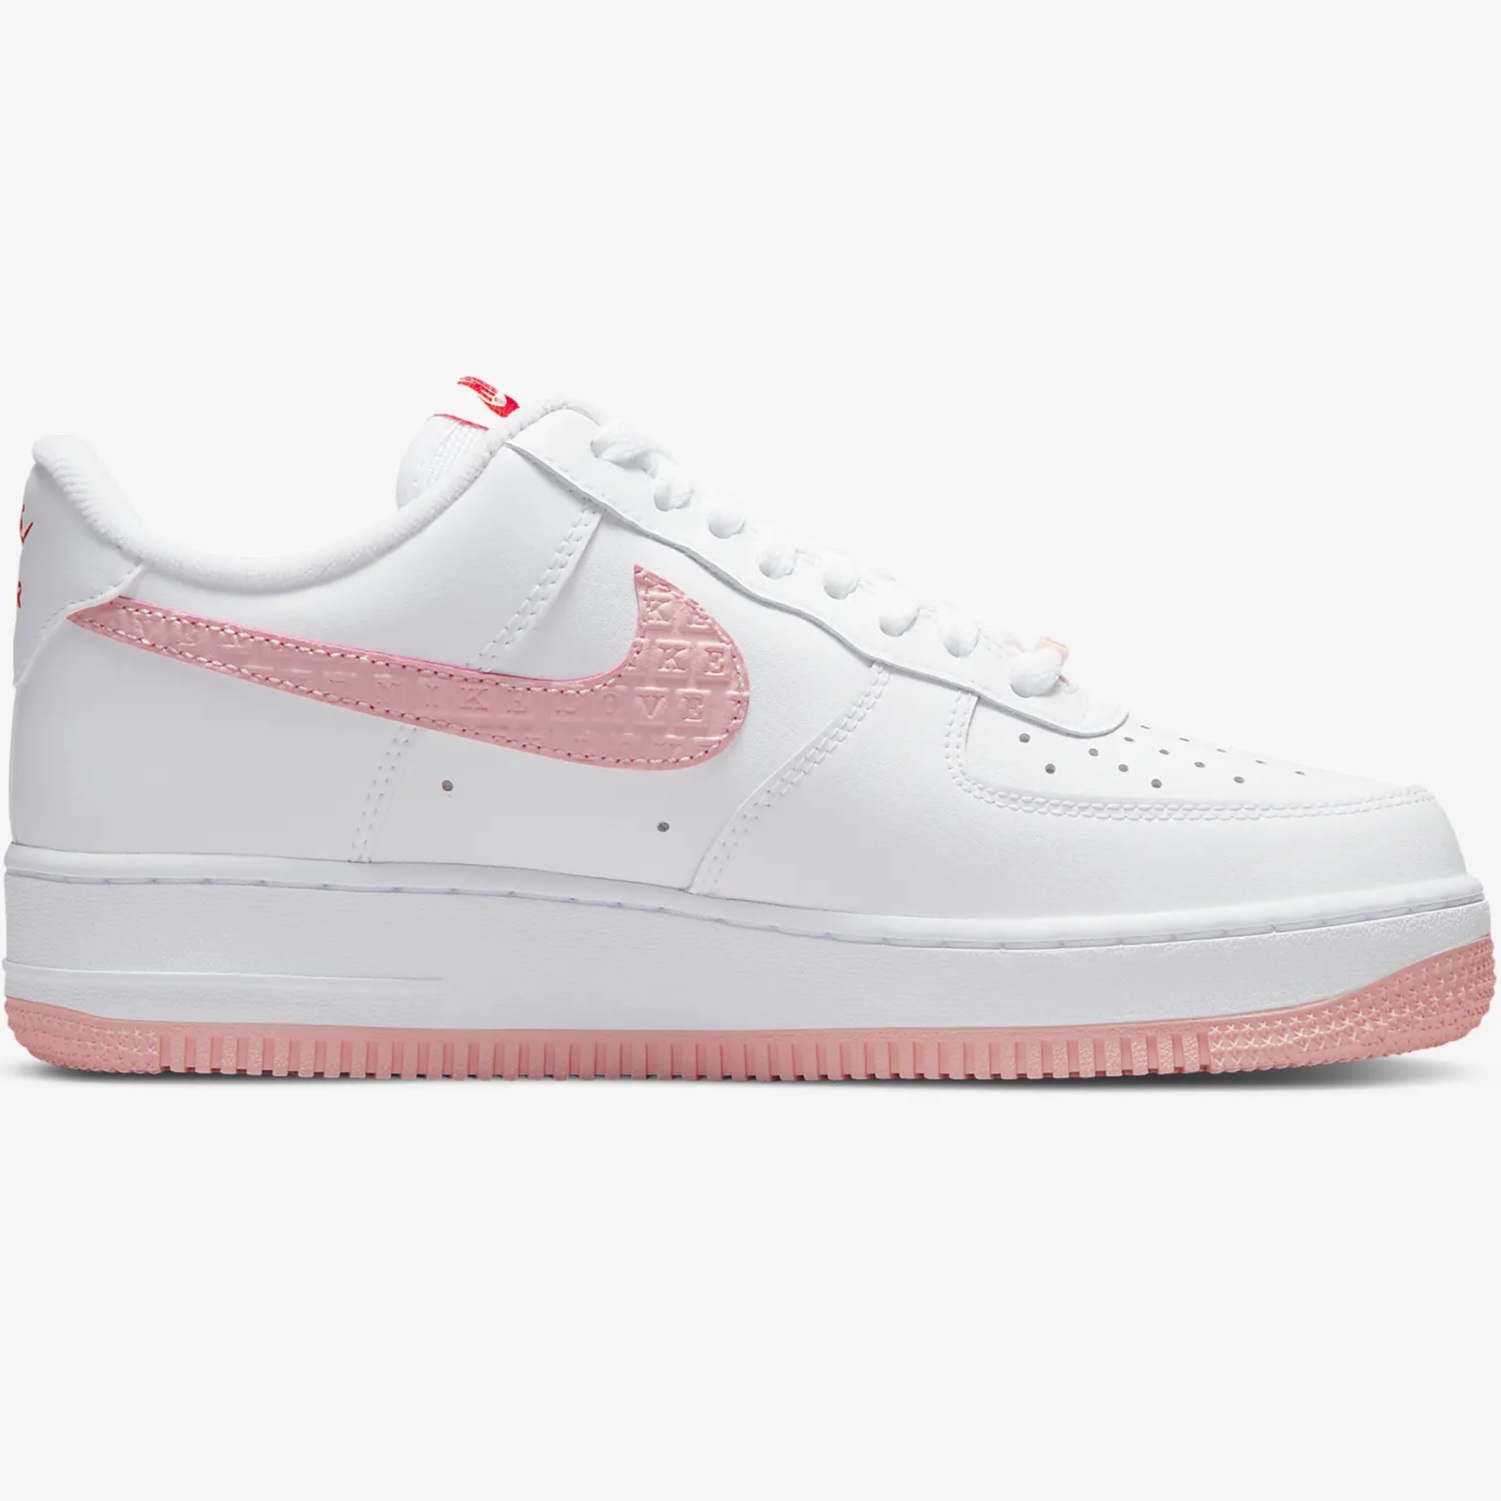 GIÀY THỂ THAO NỮ NIKE AIR FORCE 1 07 LOW VD VALENTINE´S DAY WHITE ATMOSPHERE UNIVERSITY RED SAIL DQ9320-100 2